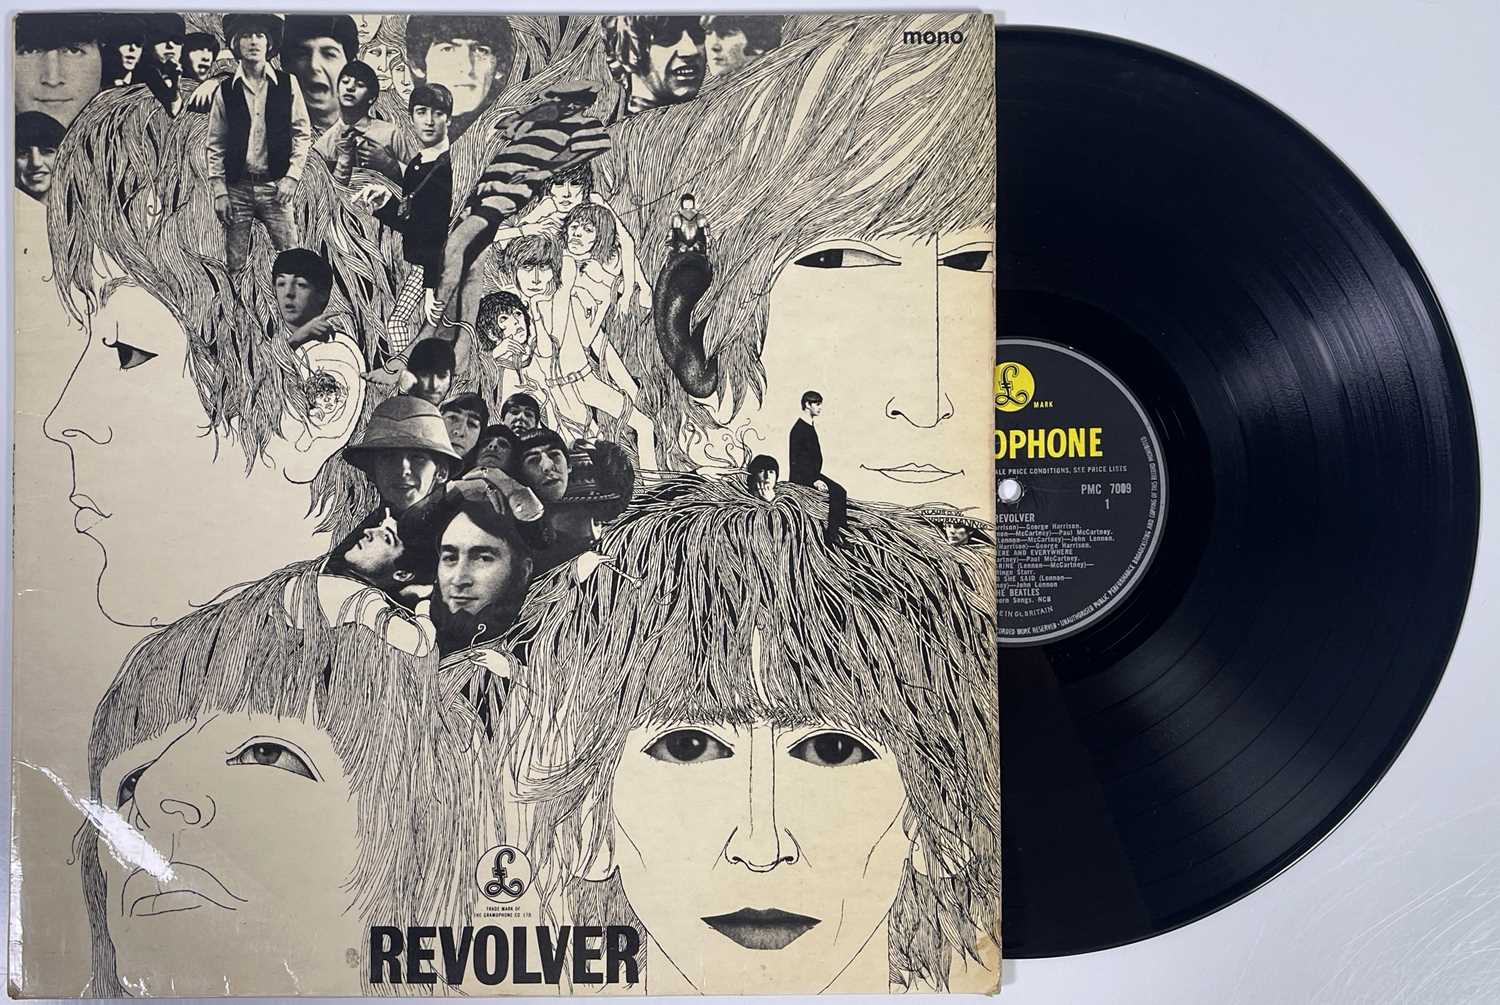 Lot 73 - THE BEATLES - REVOLVER LP (PMC 7009 - MONO FIRST PRESS - WITHDRAWN MIX).